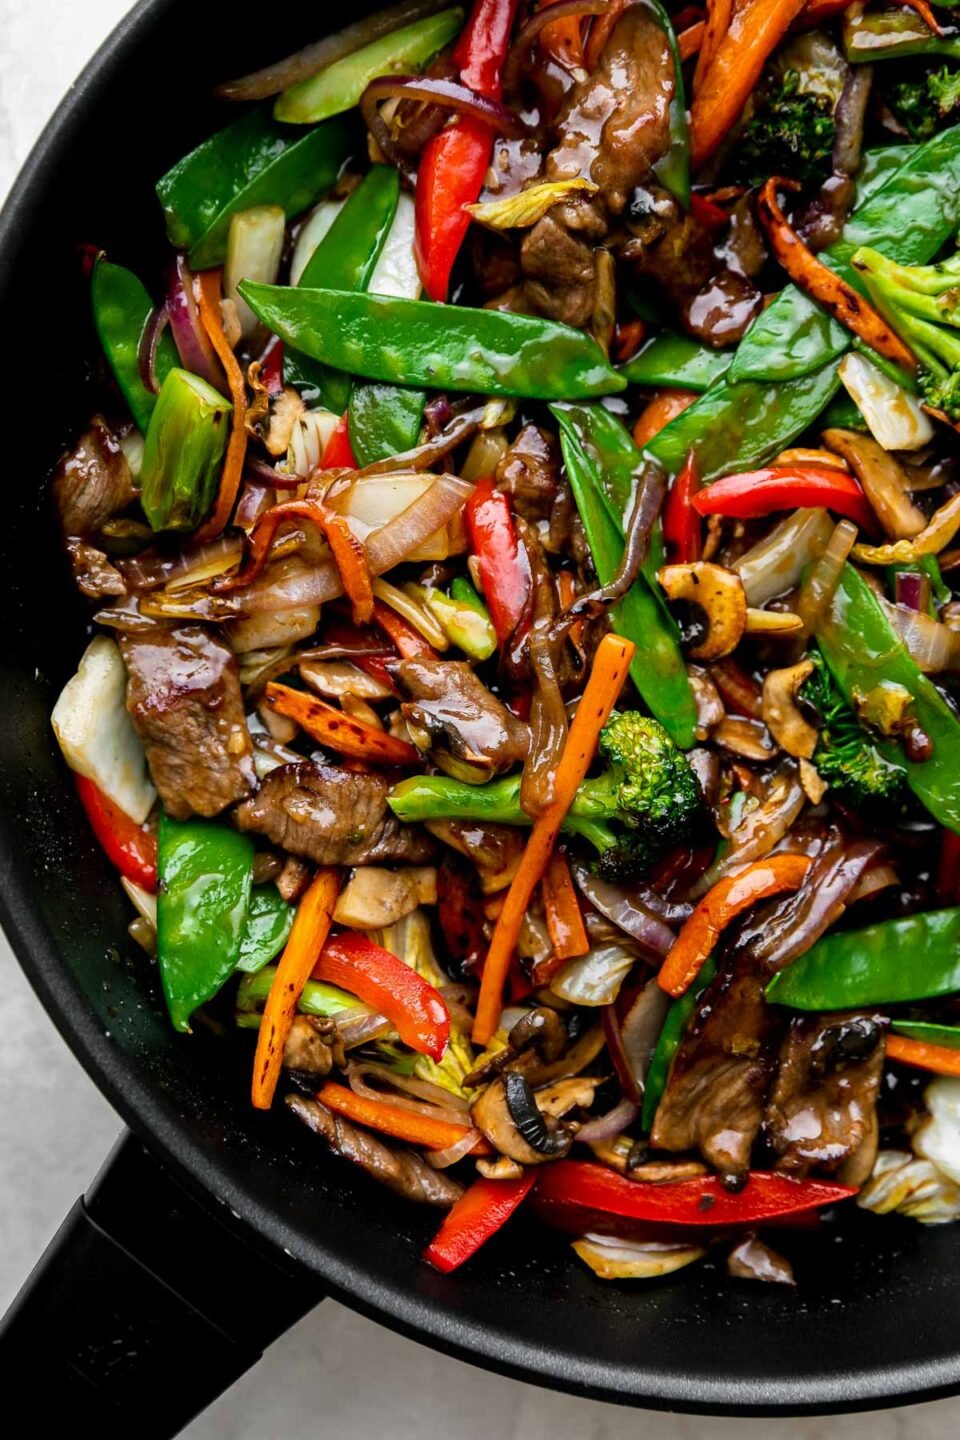 How to make beef and vegetable stir fry, step 4: Sear the beef & finish the stir fry. Finished beef vegetable stir fry fills a black Zwilling Madura Nonstick Skillet. The beef and vegetables are glossy with a coating of homemade stir fry sauce. The skillet sits atop a creamy white textured surface.